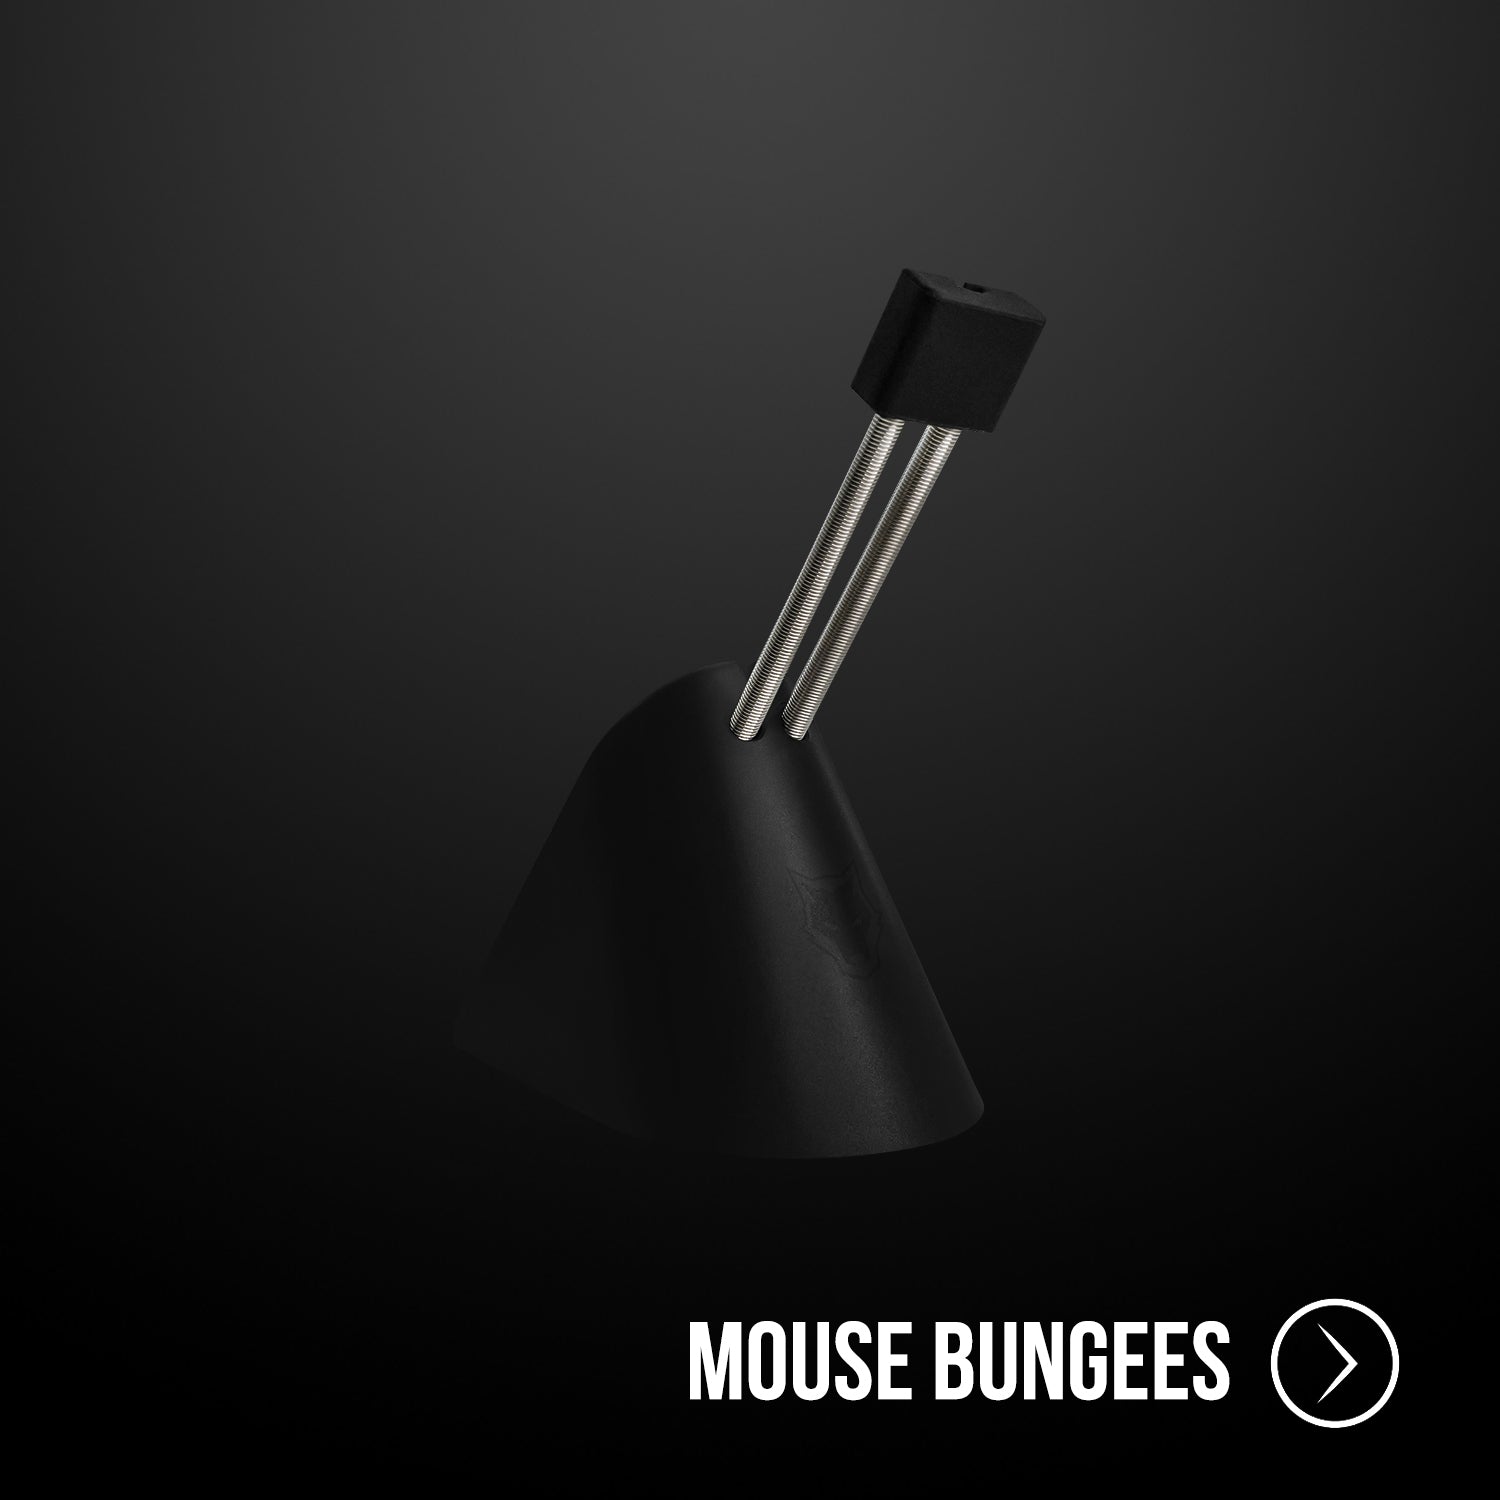 Mouse Bungees